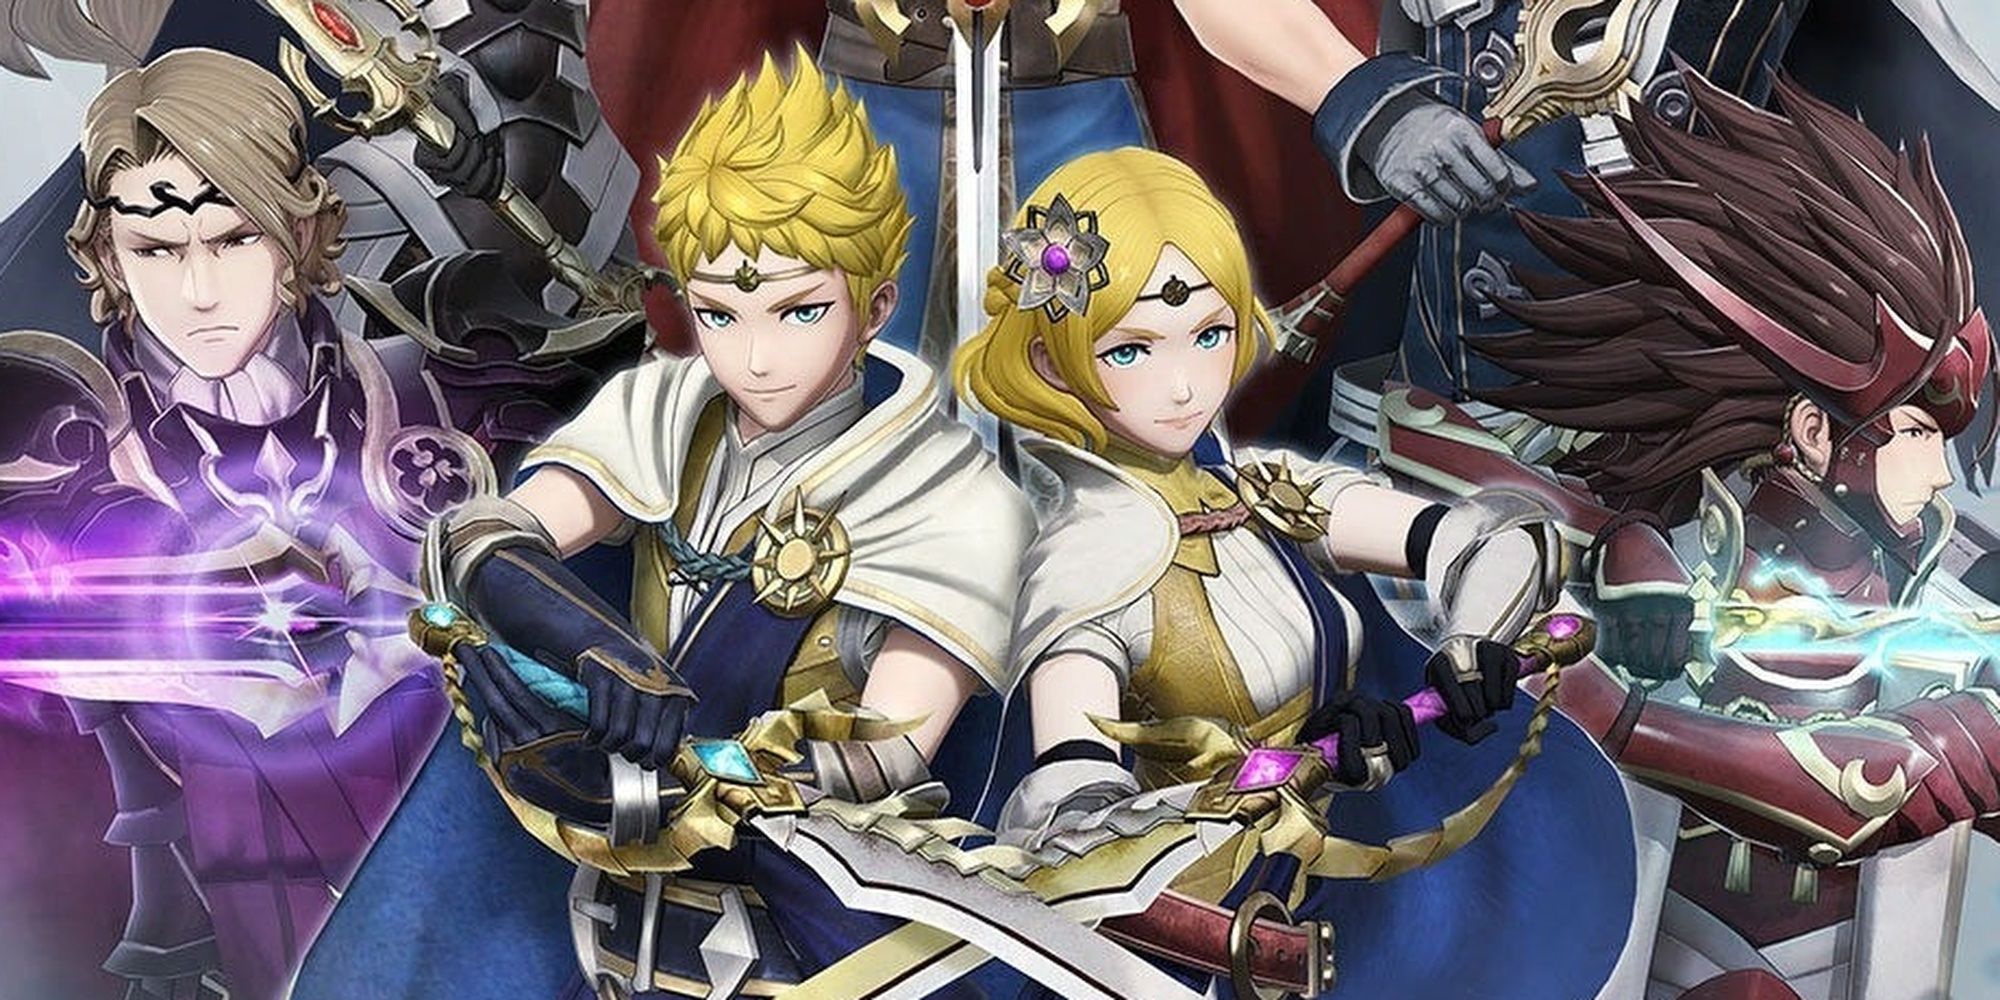 Fire Emblem Warriors cover with twins on the cover